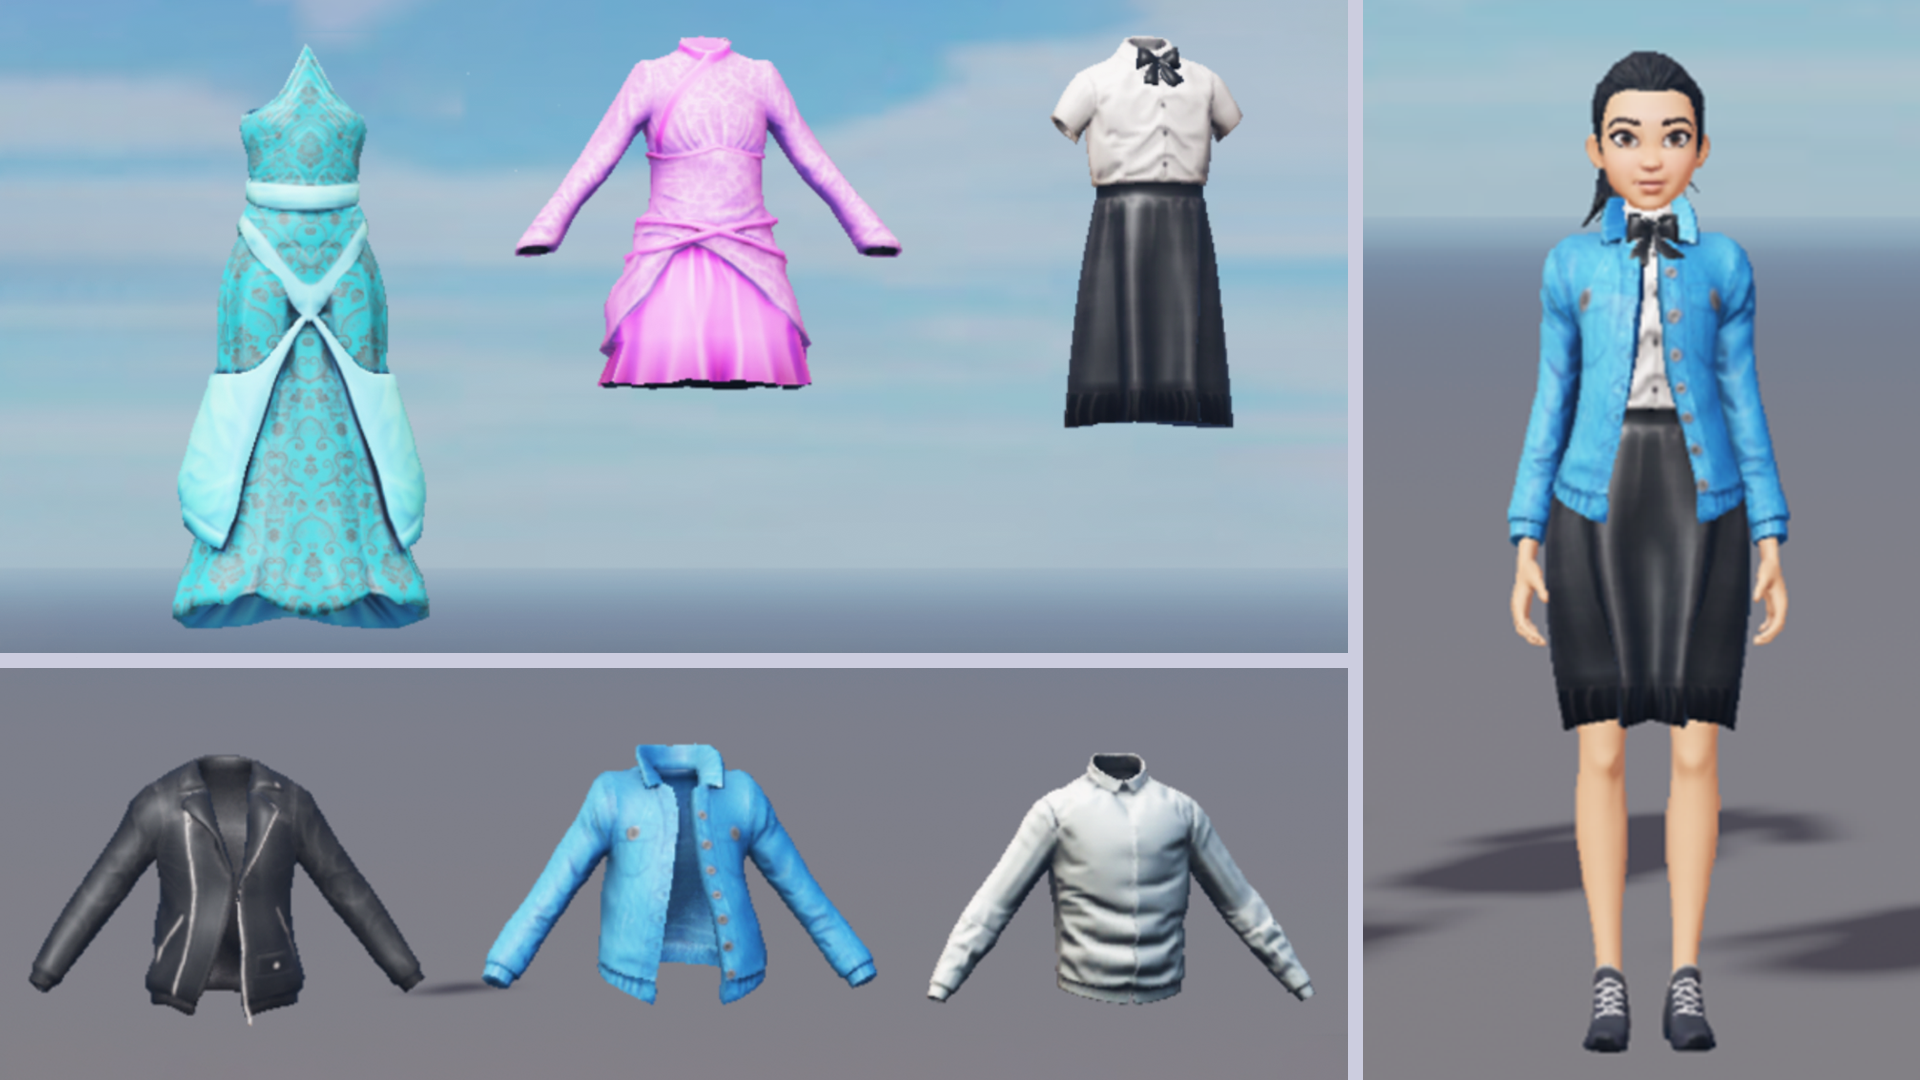 IMPORTANT SECURITY UPDATES! CHANGE GROUP NAMES! LAYERED CLOTHING